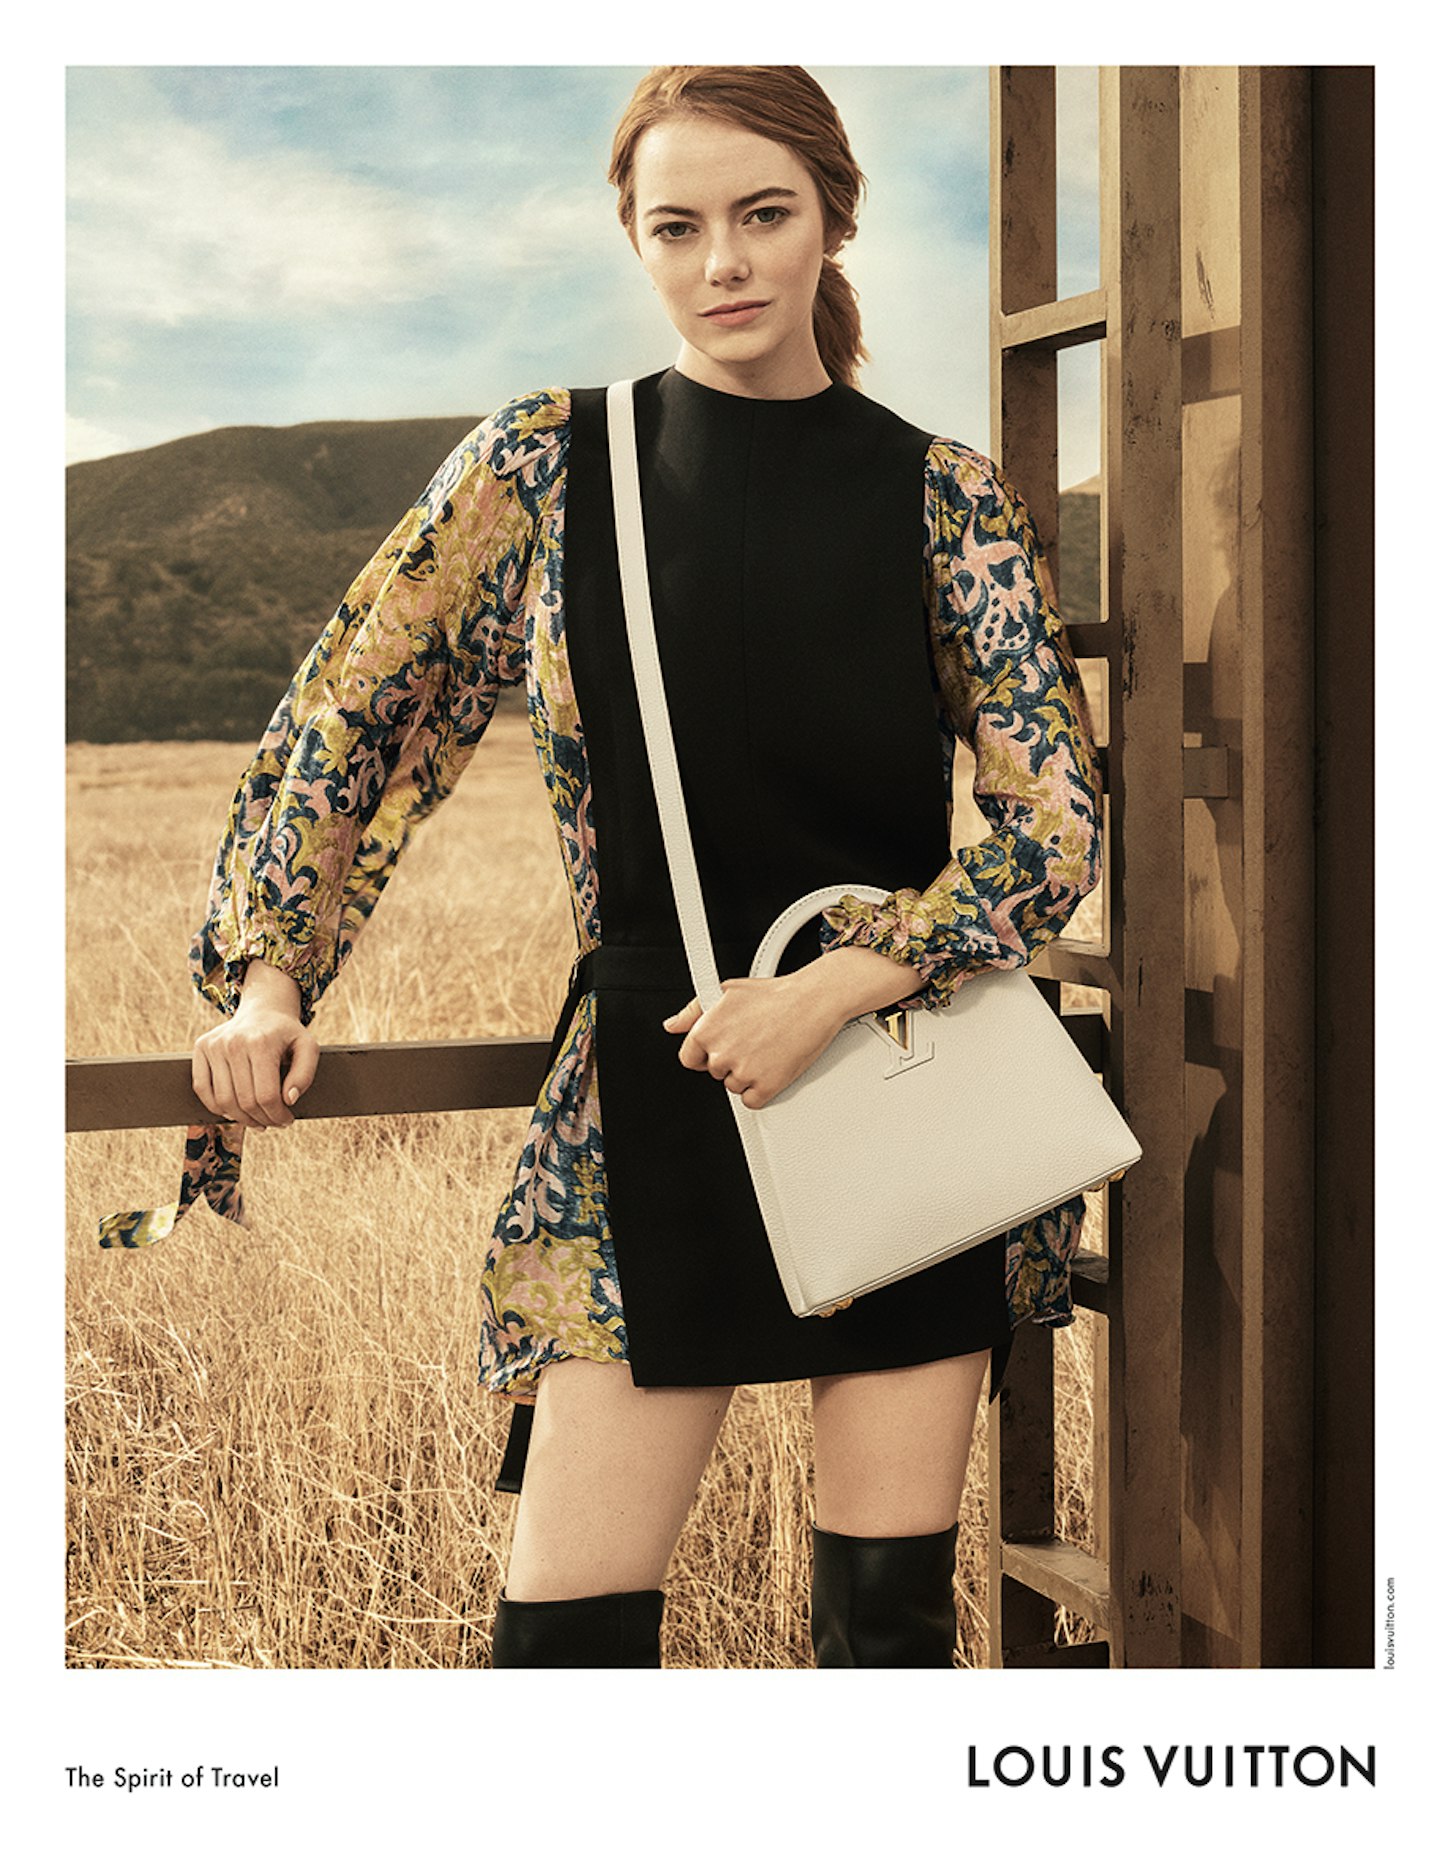 Just in: Emma Stone's first fragrance campaign for Louis Vuitton